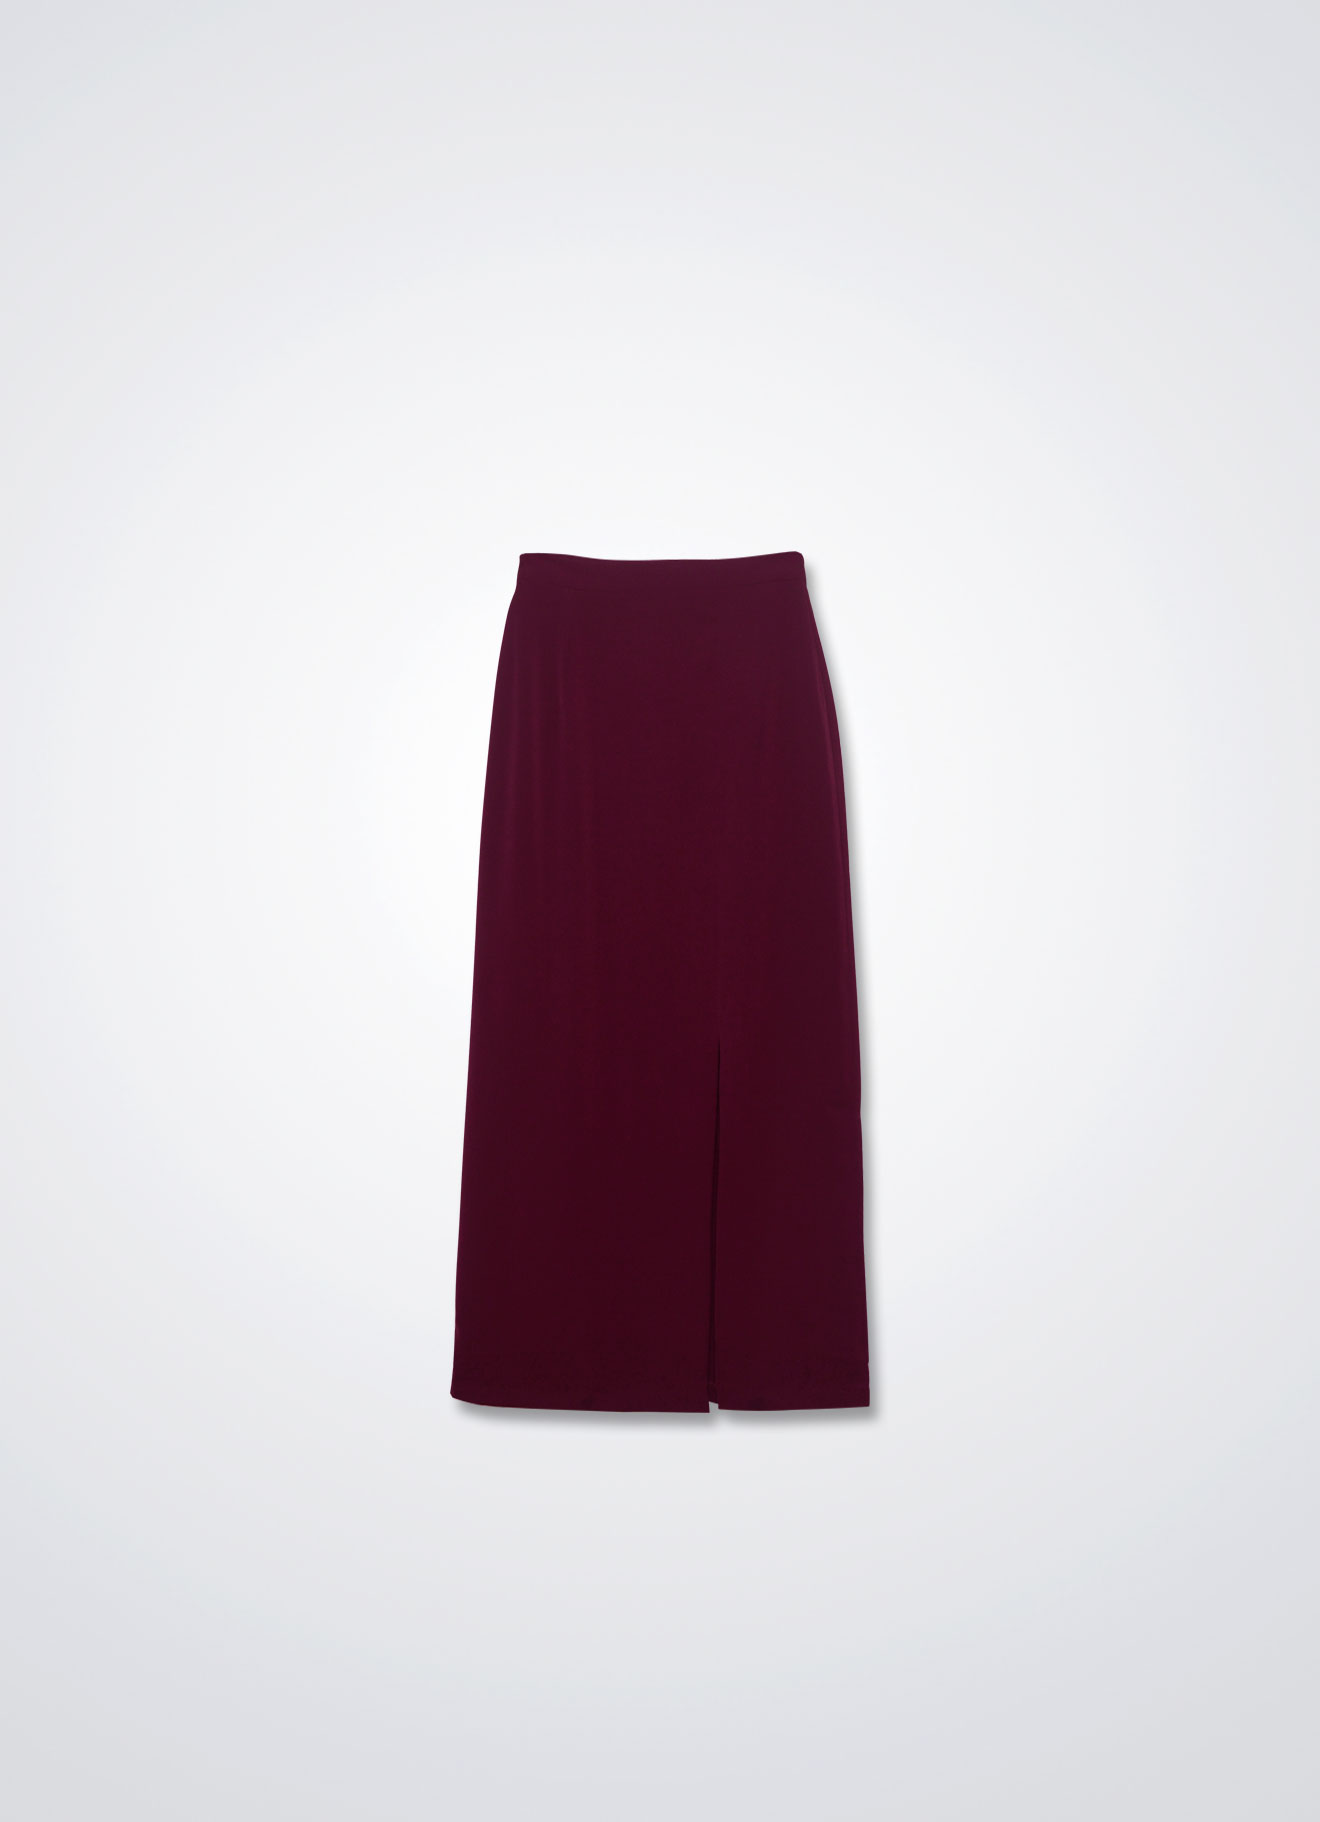 Rumba-Red by Skirt